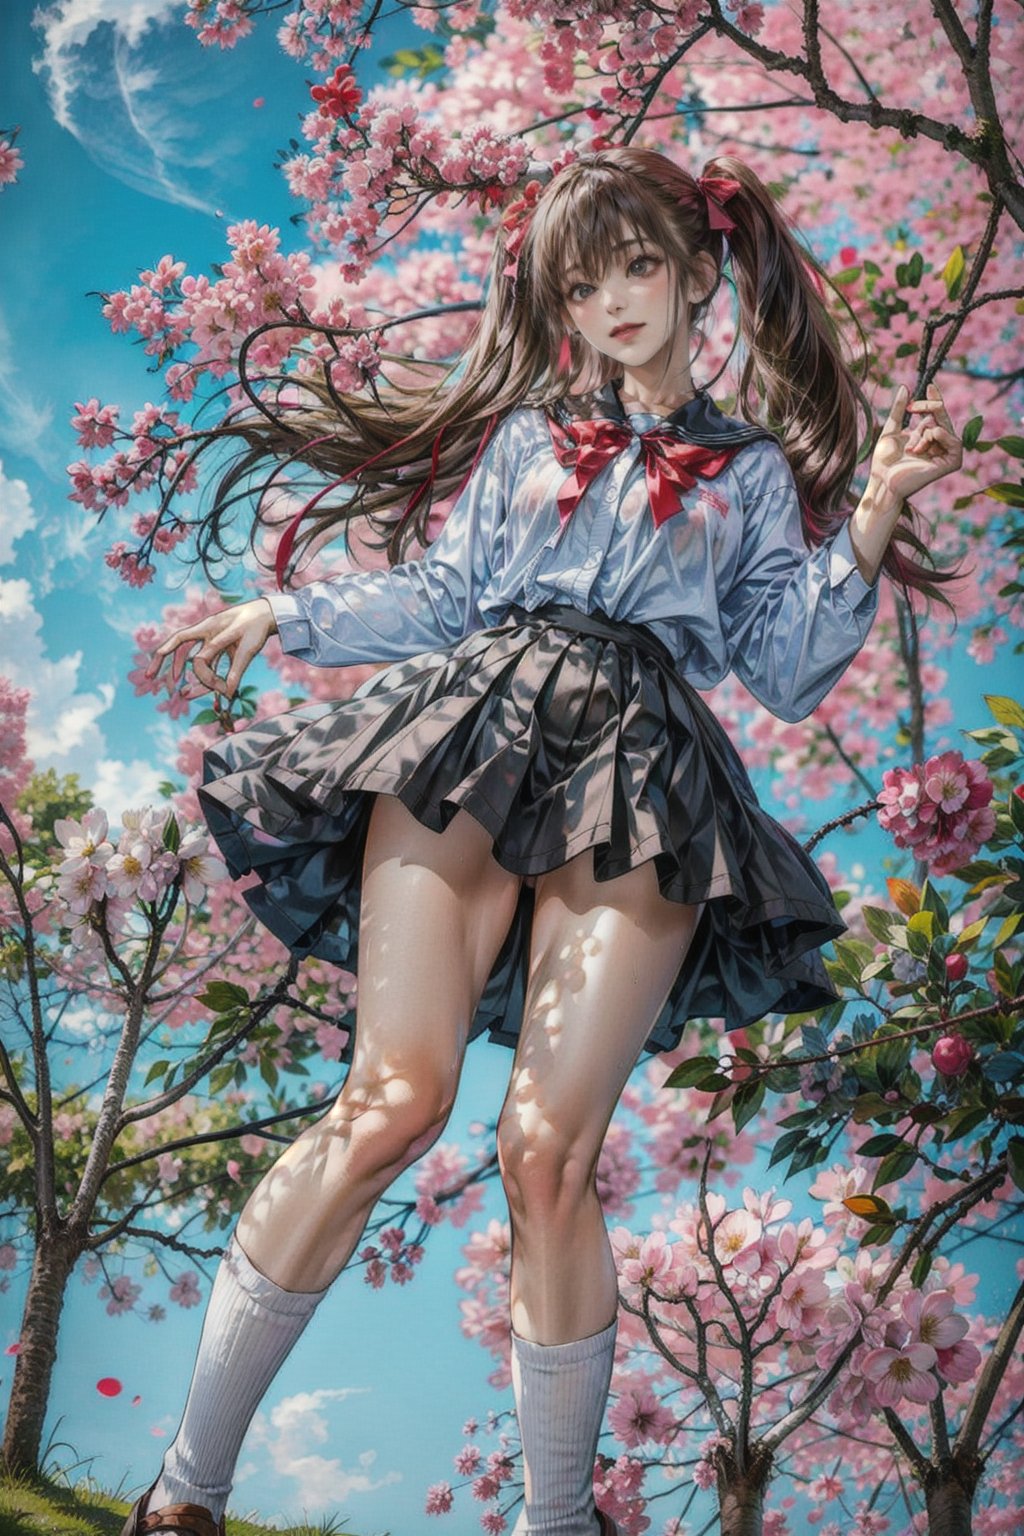 masterpiece,  highest quality,  8K,  RAW photo,
BREAK
1 japanese girl, high school student, wet school uniform,  (haircut of uniform length), (one length), see-through nude body and nipples, unclothed, Beautiful shiny black hair, straight hair, messy hair, twintails, pale white skin, white skin, full body to the toes,  beautiful thighs, (navy blue pleated skirt), looking up, close eyes, standing under the cherry trees, ((Cherry blossom storm)), cherry blossom petals are falling, reach out a hand, ((angle from below)), dimly light,  at night, high_school_girl, best quality,CherryBlossom_background,DonMS4kur4XL,scandal rina